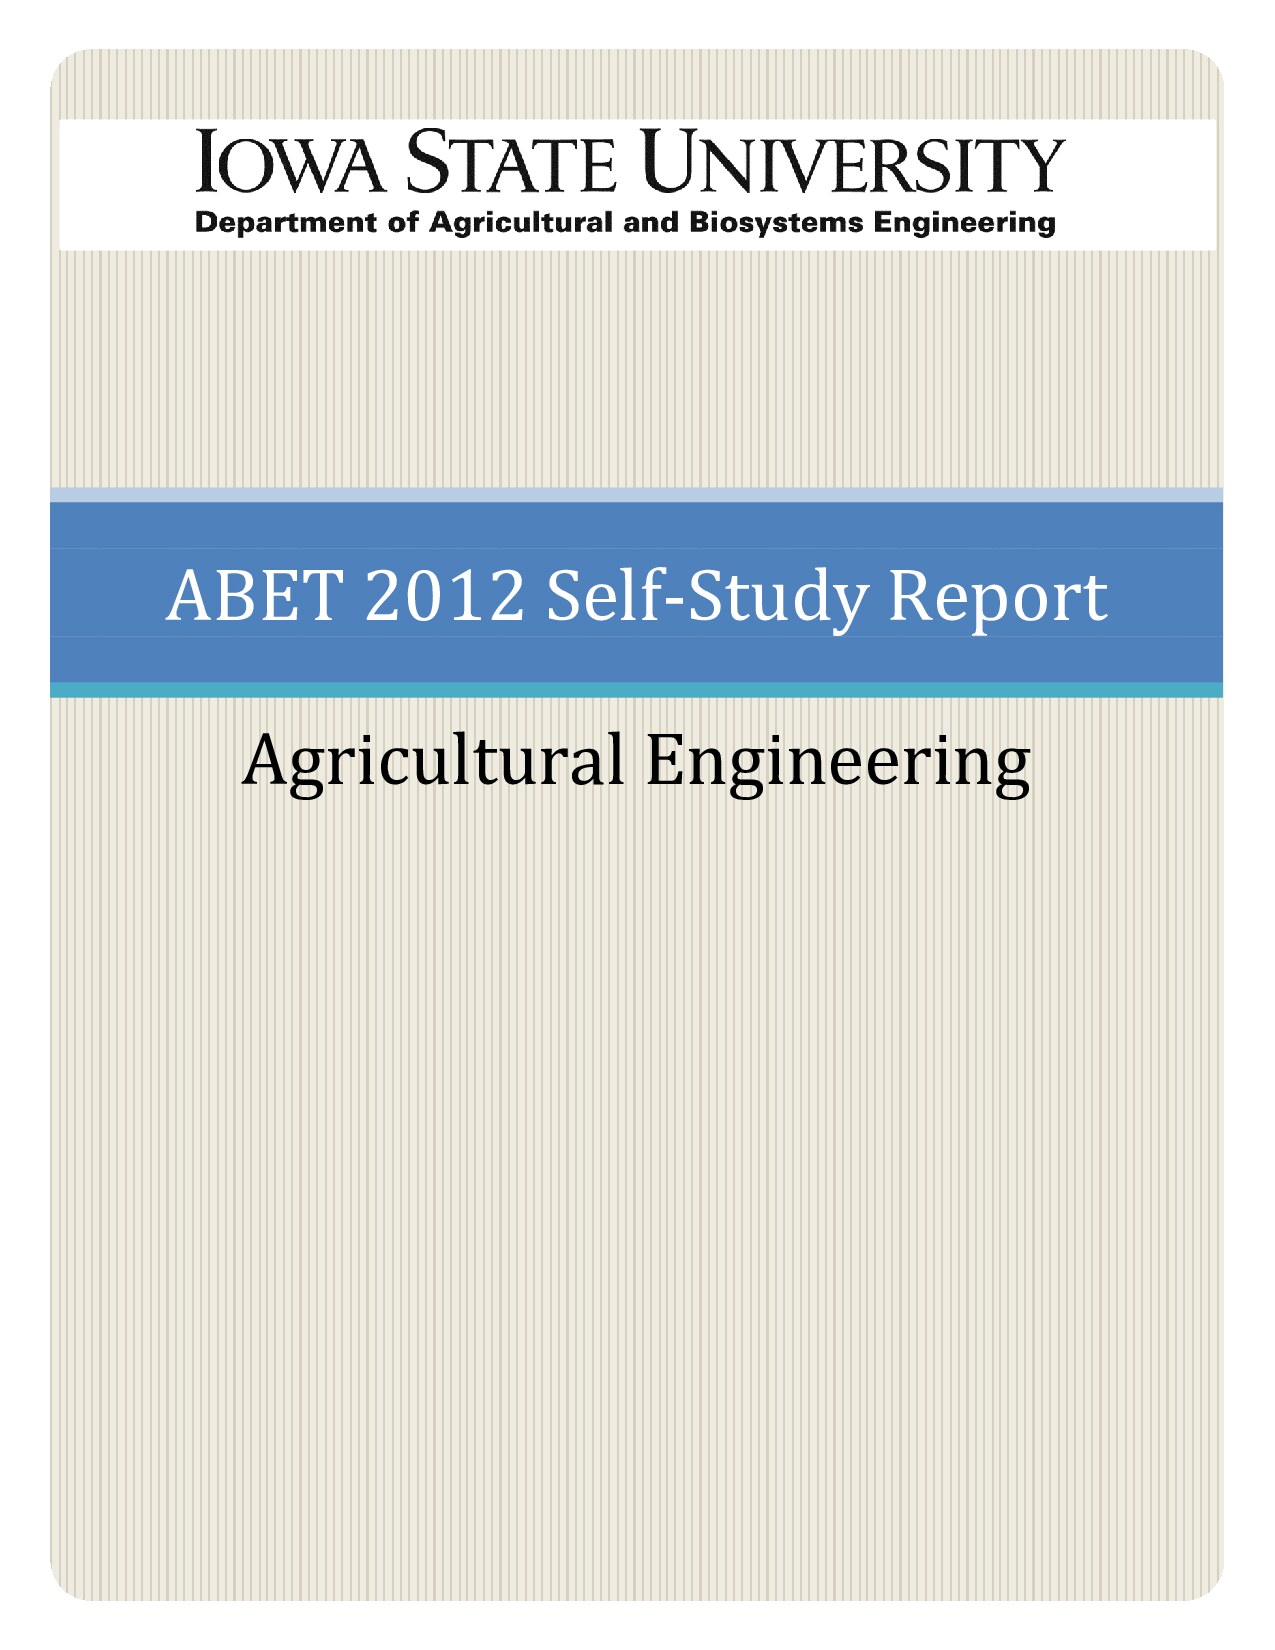 AE ABET Self-study report - Agricultural and Biosystems Engineering ( PDFDrive.com )